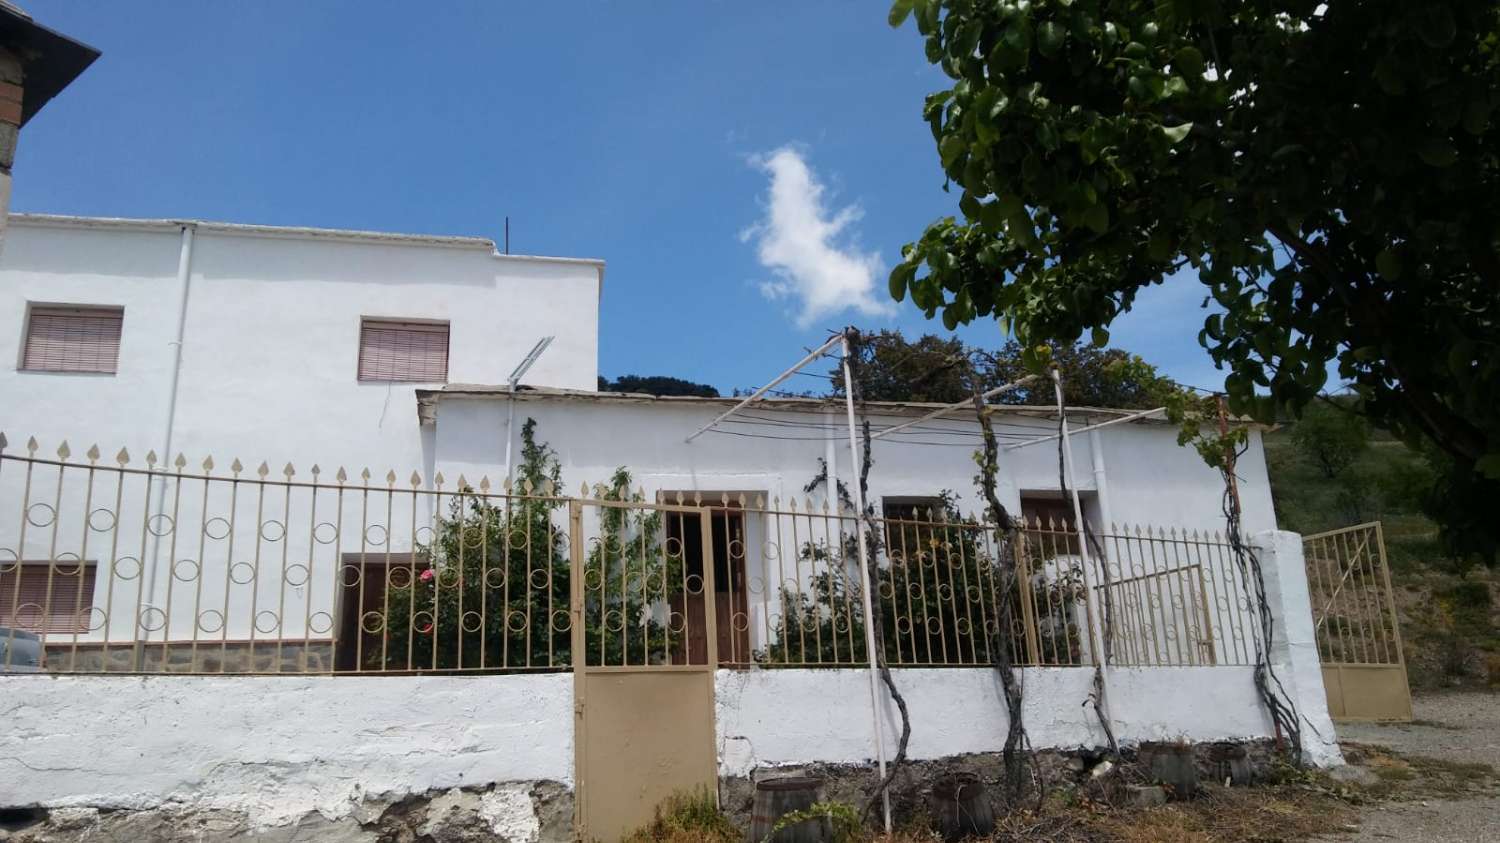 Renovated farmhouse with warehouse and views in Torvizcón, Granada